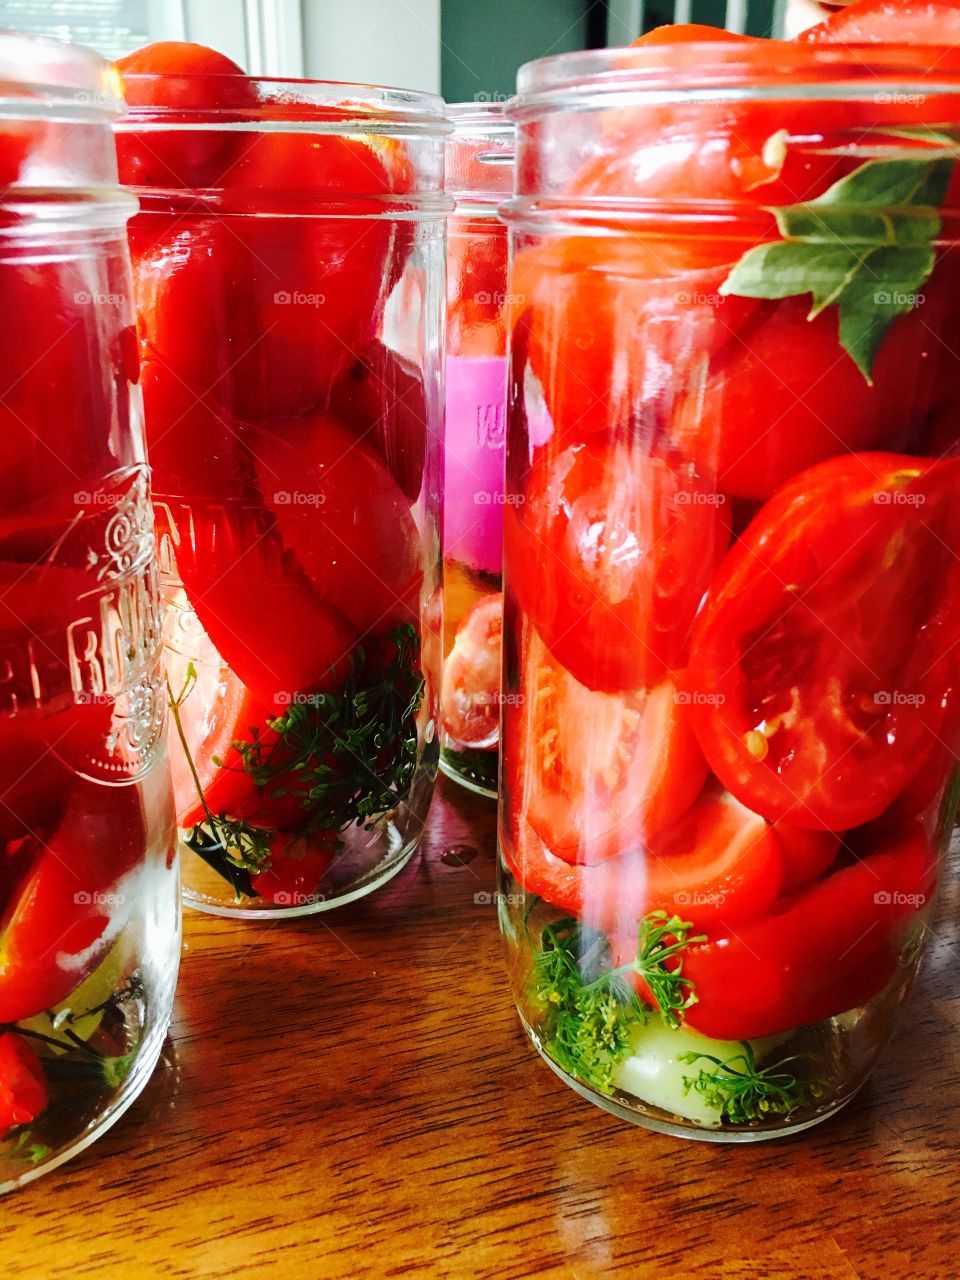 Winter Pickled tomatoes 